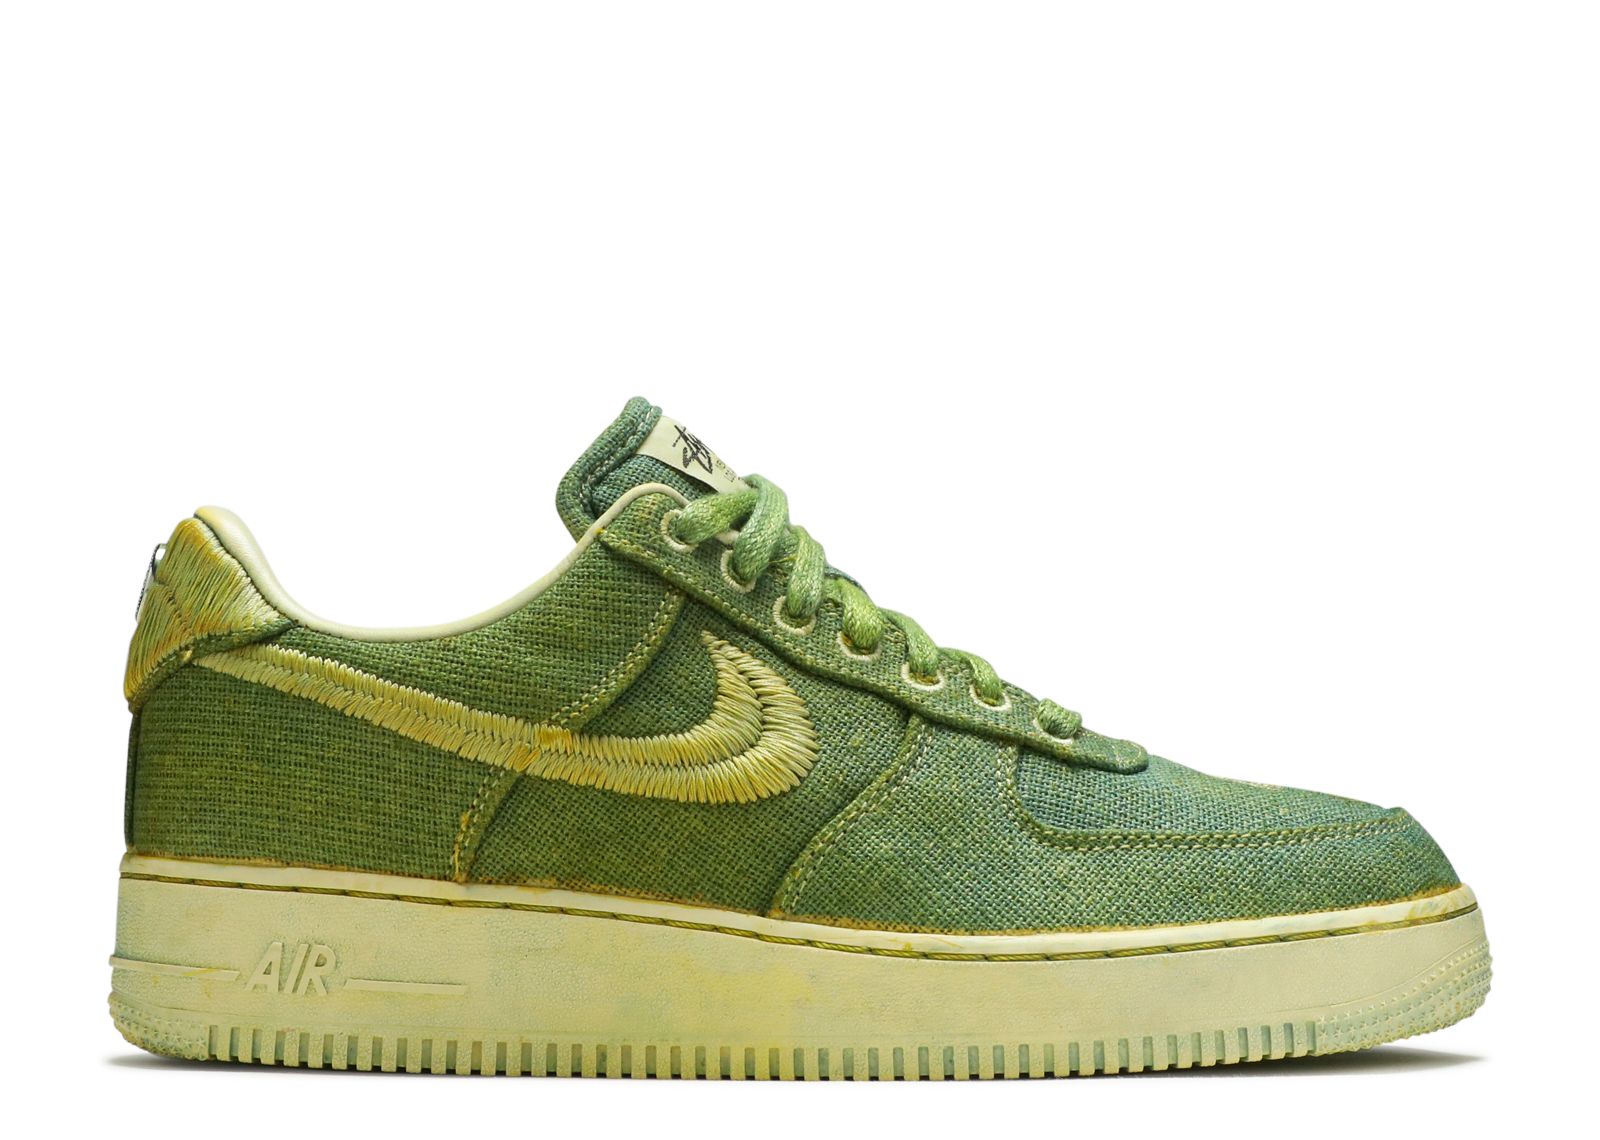 Louis Vuitton Nike Air Force 1 Green 2022 (US9) – Curated by Charbel